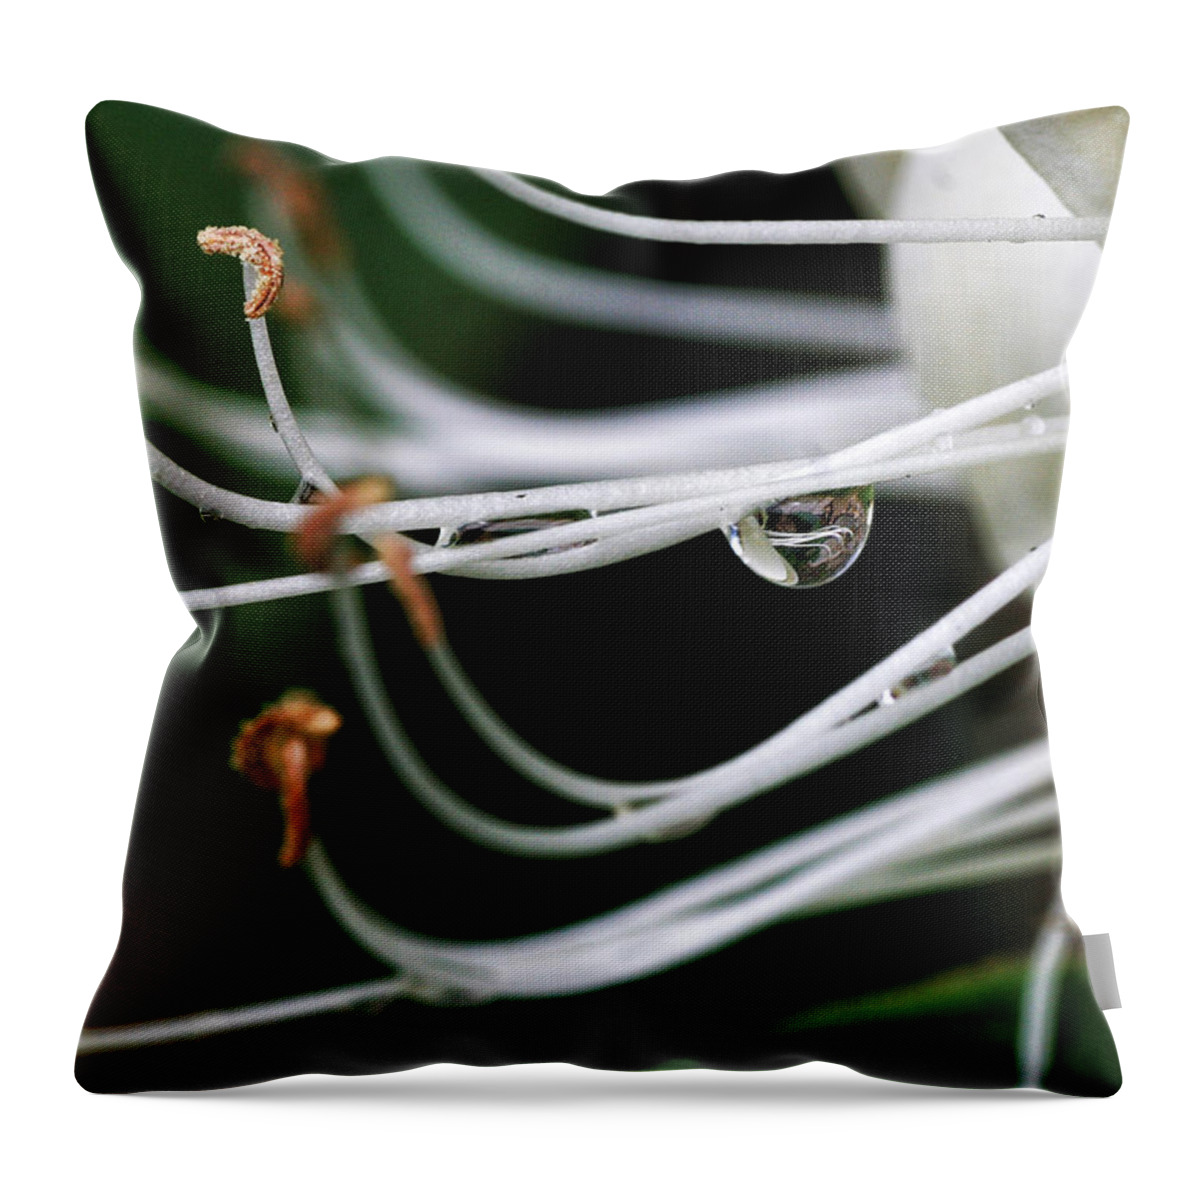 Flower Throw Pillow featuring the photograph Honeysuckle Dewdrop by William Selander